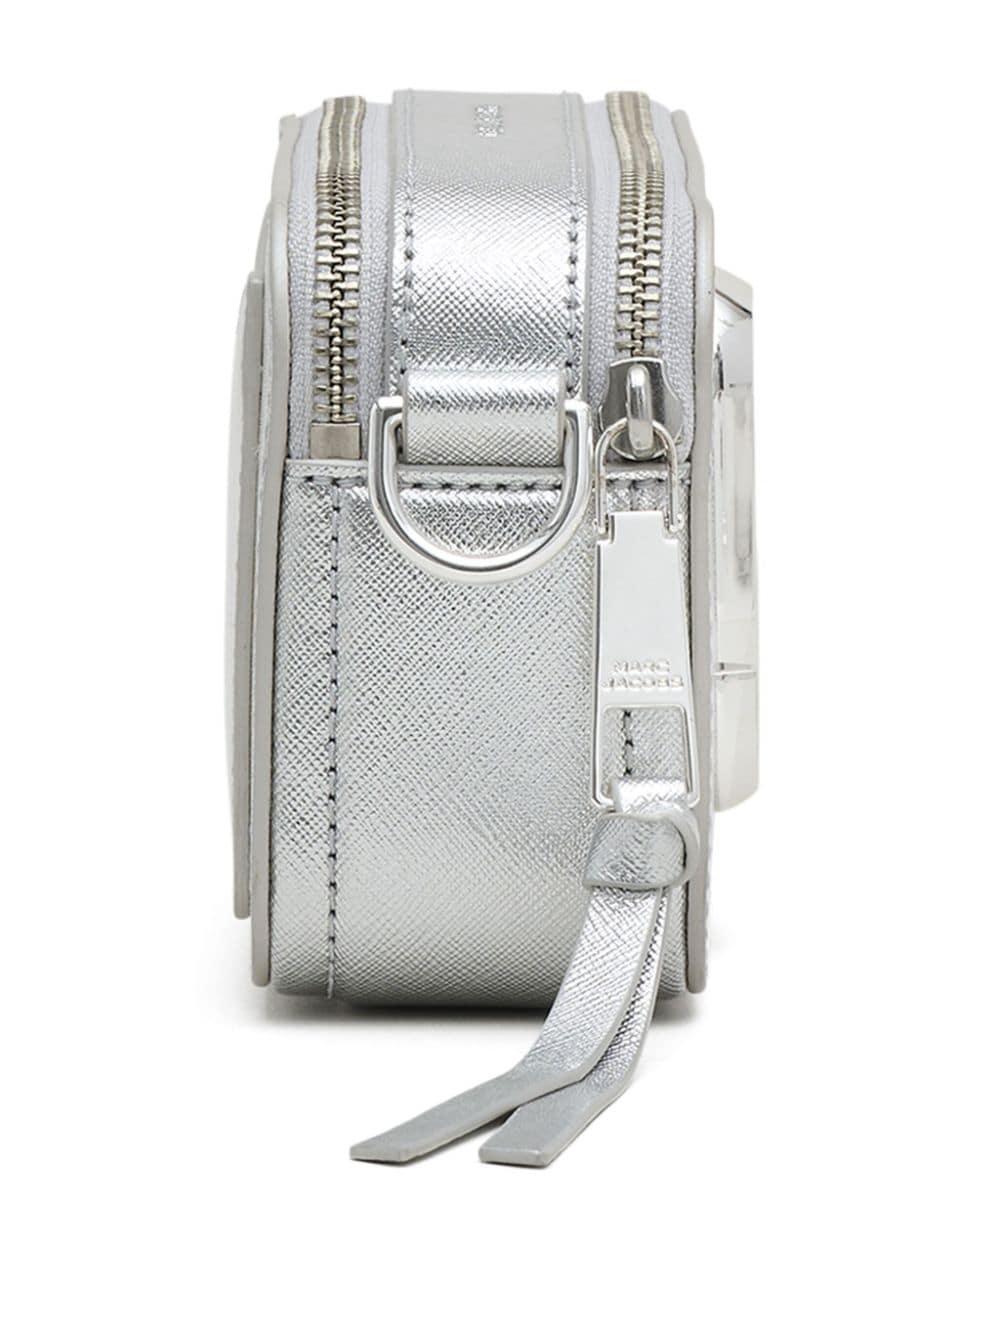 Marc Jacobs Women's Snapshot DTM Camera Bag, White/Silver, One